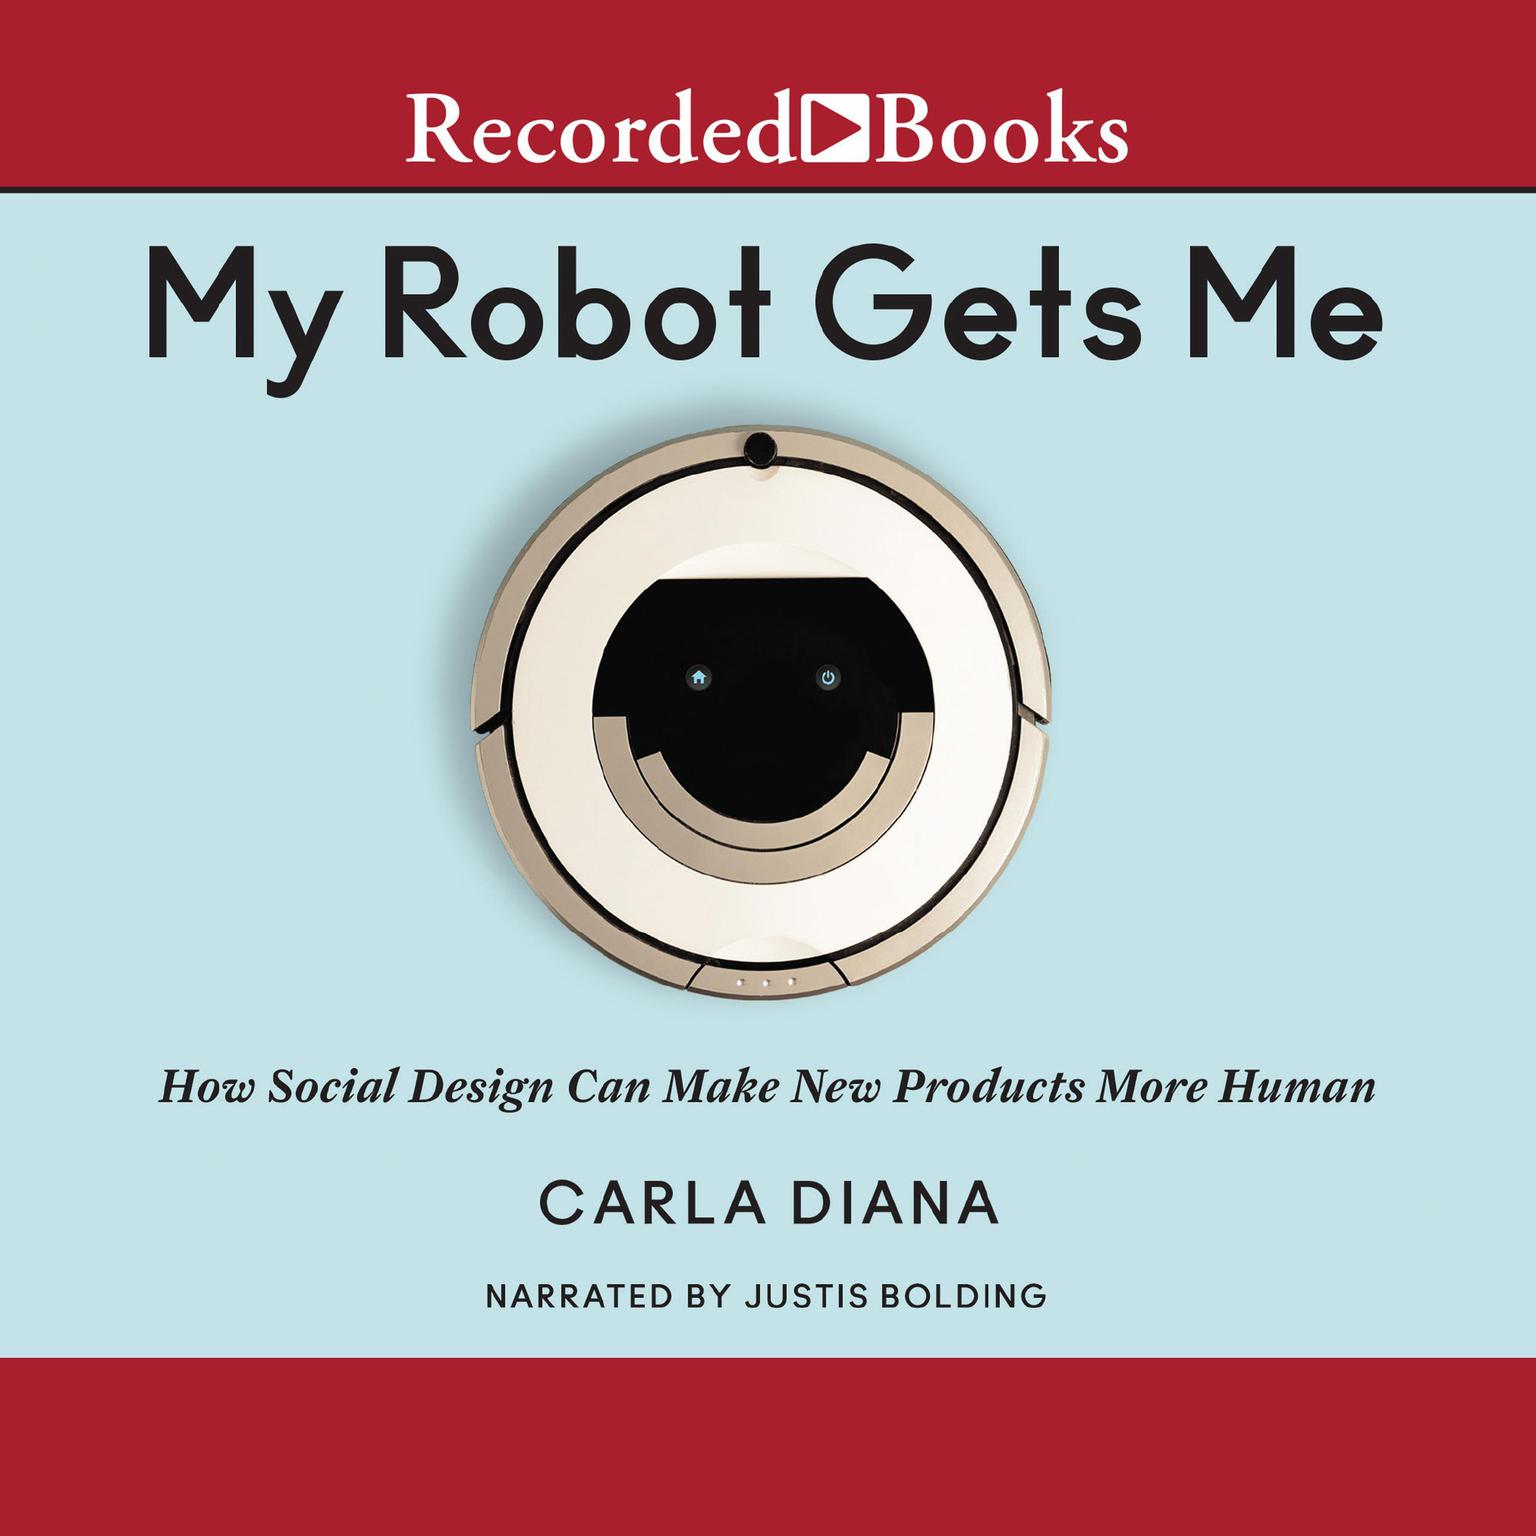 My Robot Gets Me: How Social Design Can Make New Products More Human Audiobook, by Carla Diana